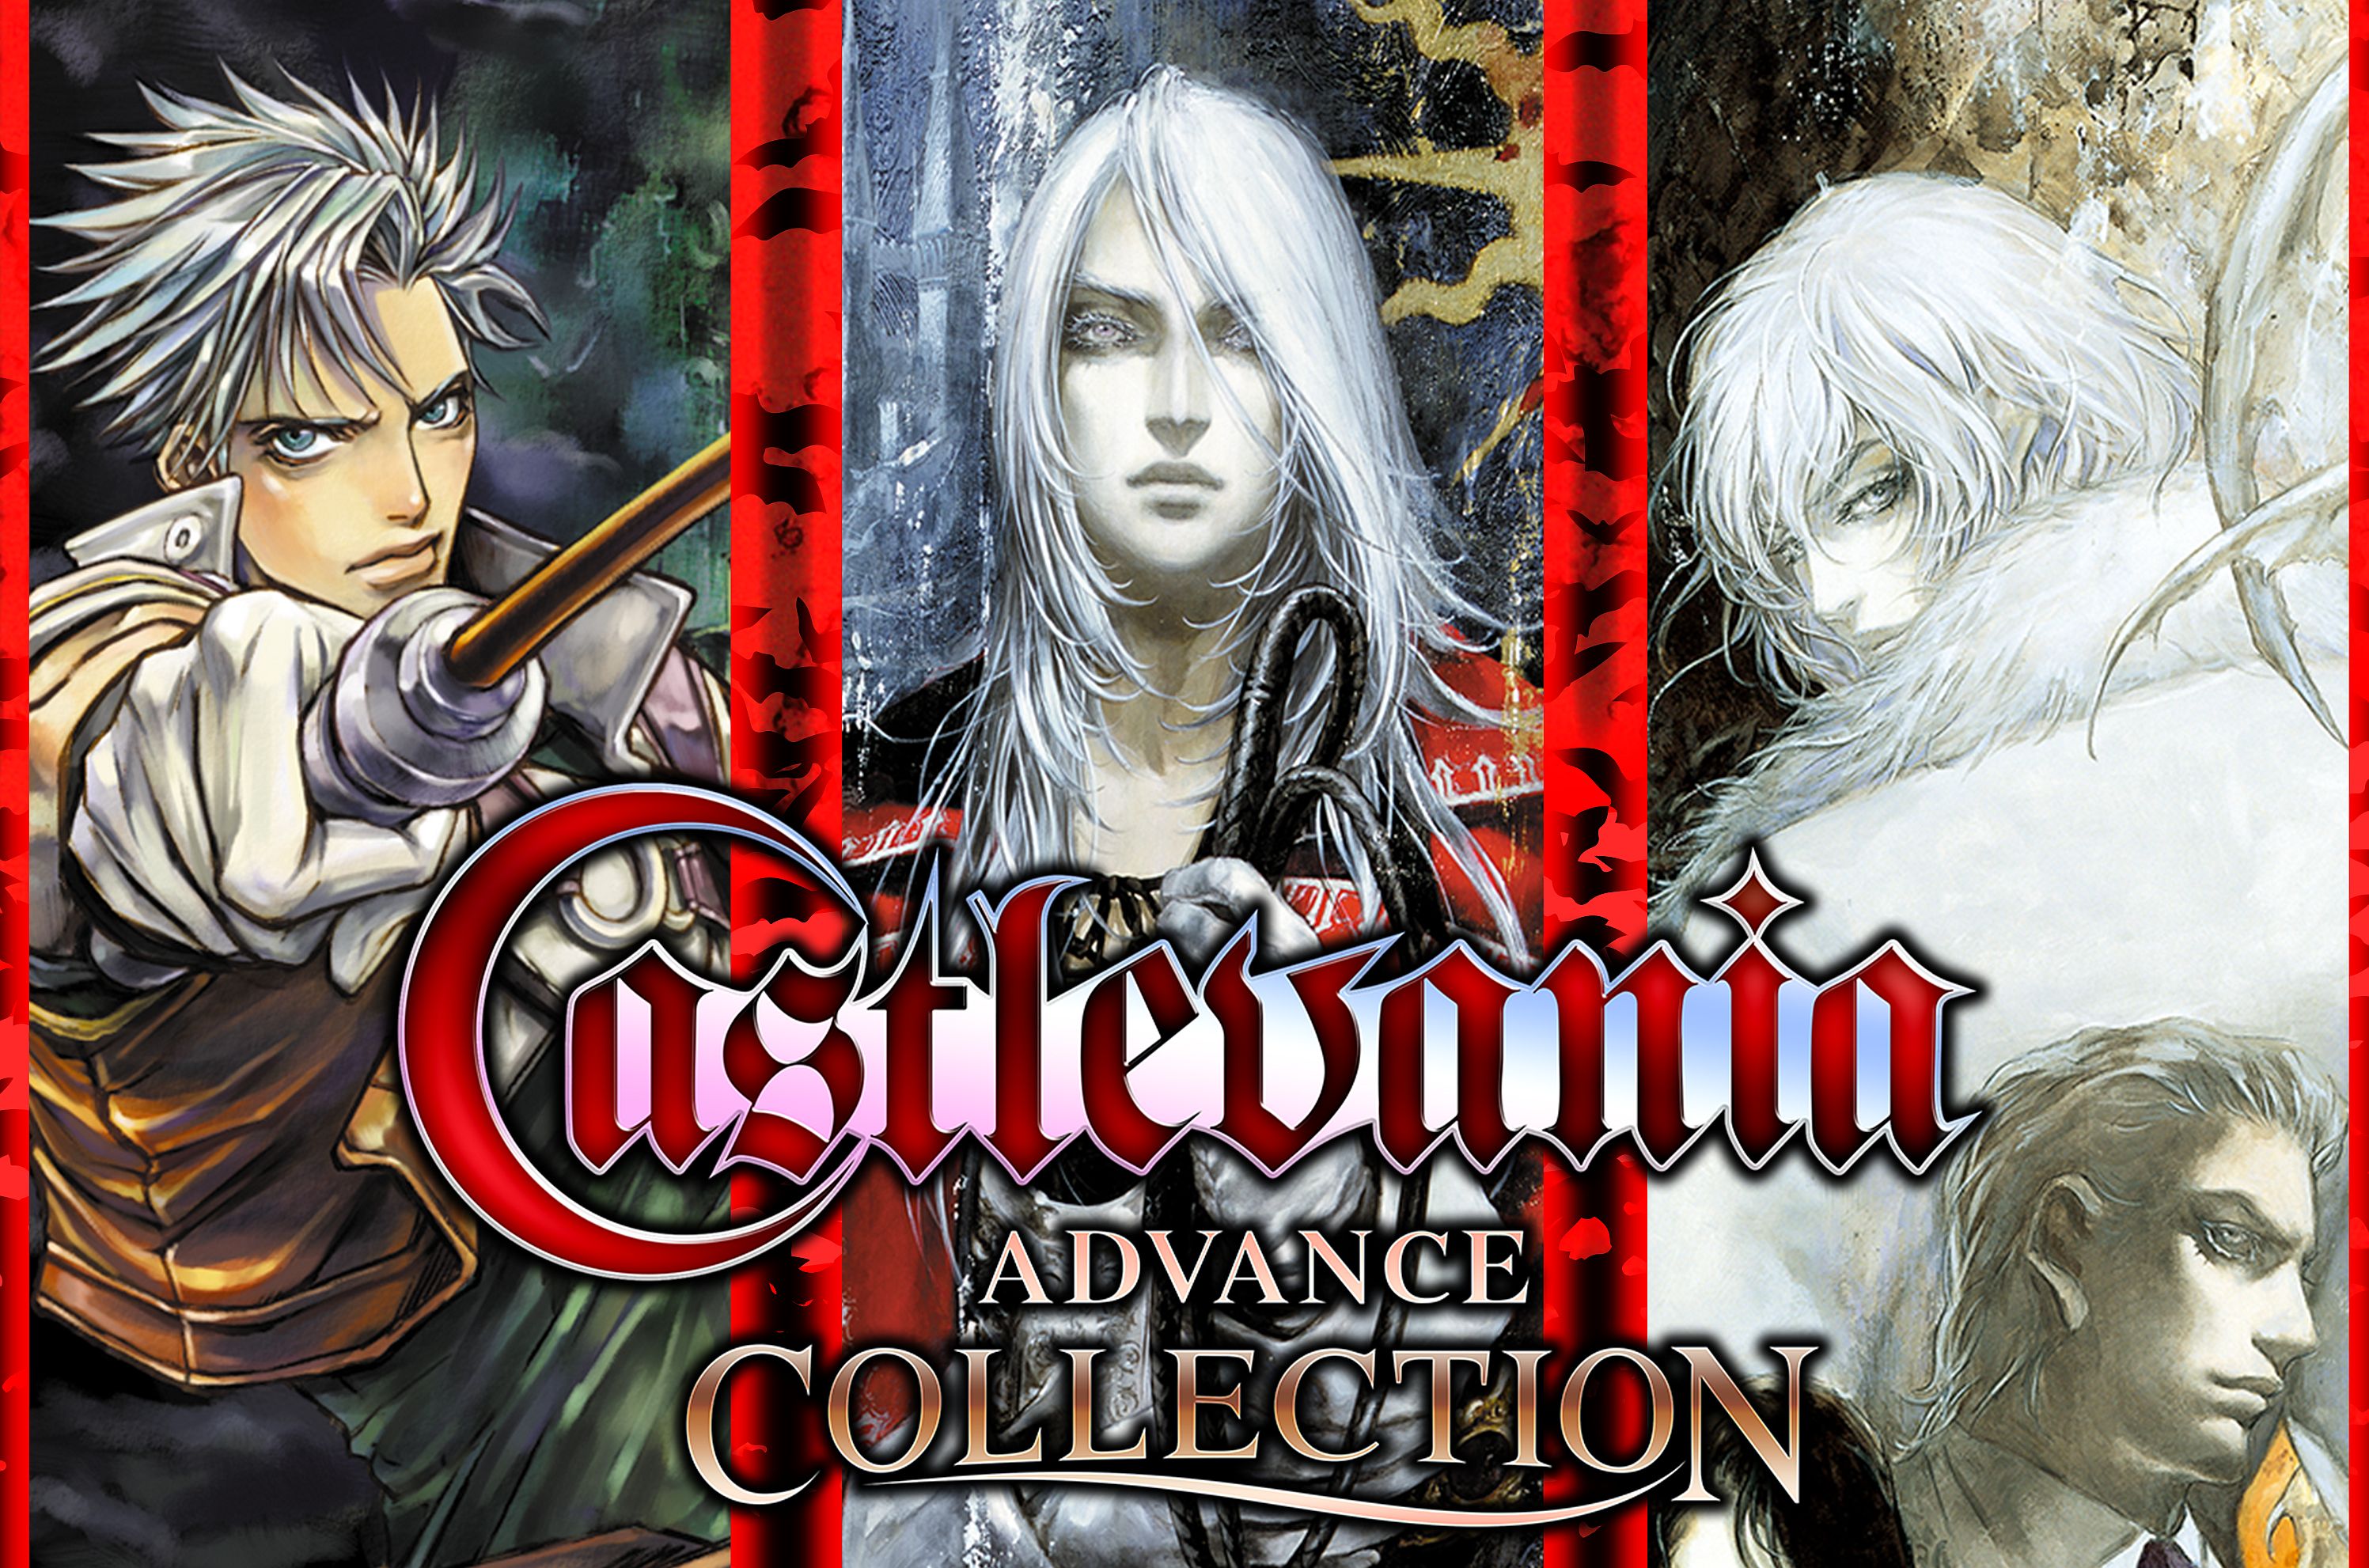 Image for Castlevania Advance Collection out now on consoles and PC